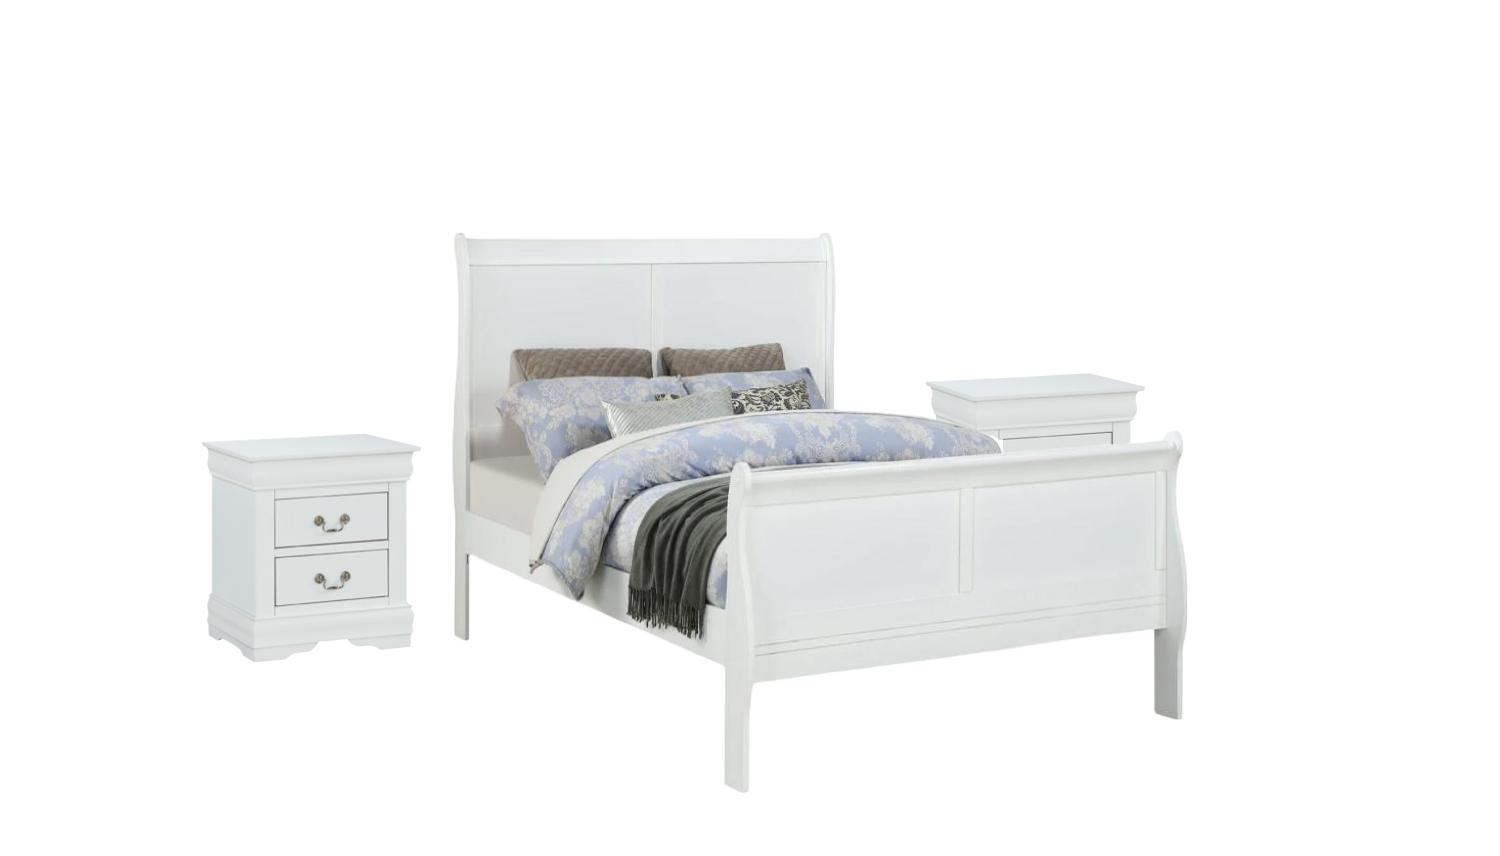 Contemporary, Simple Panel Bedroom Set Louis Philip B3650-T-Bed-3pcs in White 